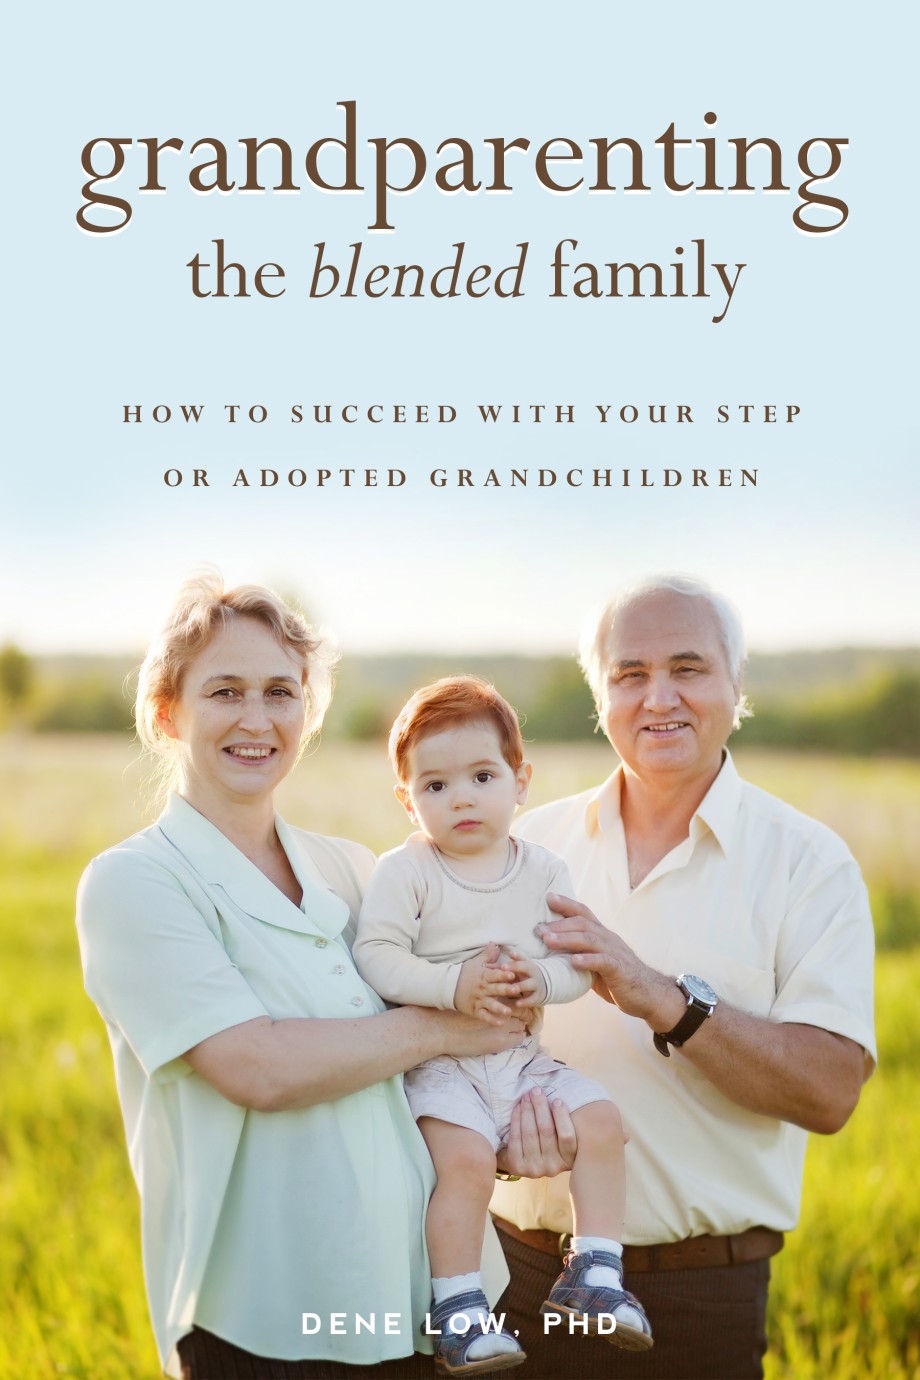 Grandparenting the Blended Family How to Succeed With Your Step or Adopted Grandchildren